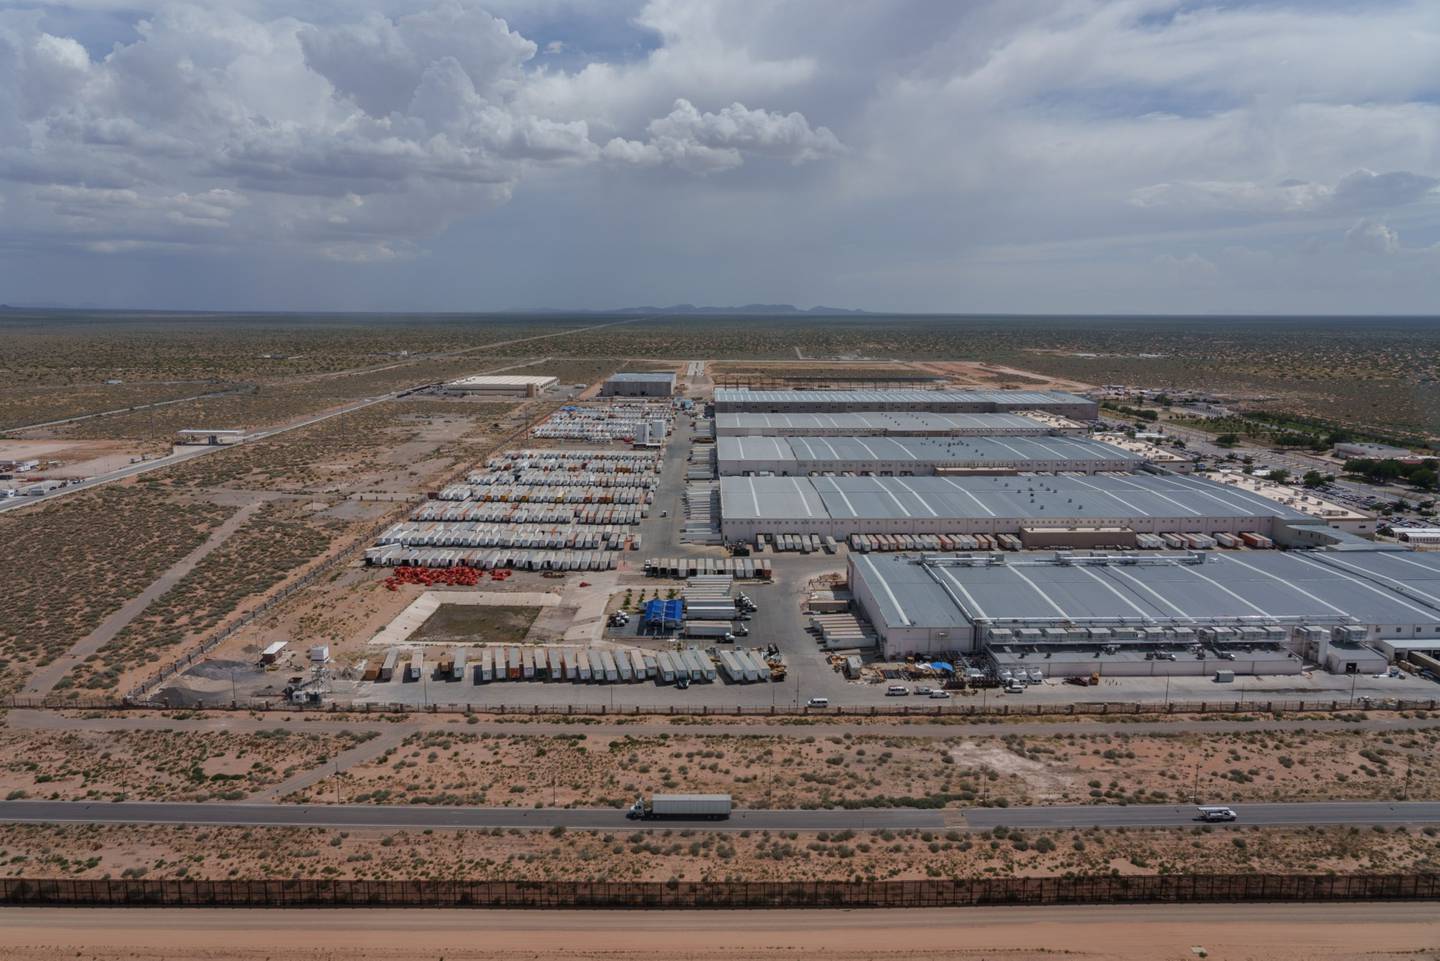 An aerial view of a Foxconn factory in San Jeronimo, Chihuahua state, Mexico, as seen from Santa Teresa, New Mexico on Tuesday, August 9, 2022.dfd